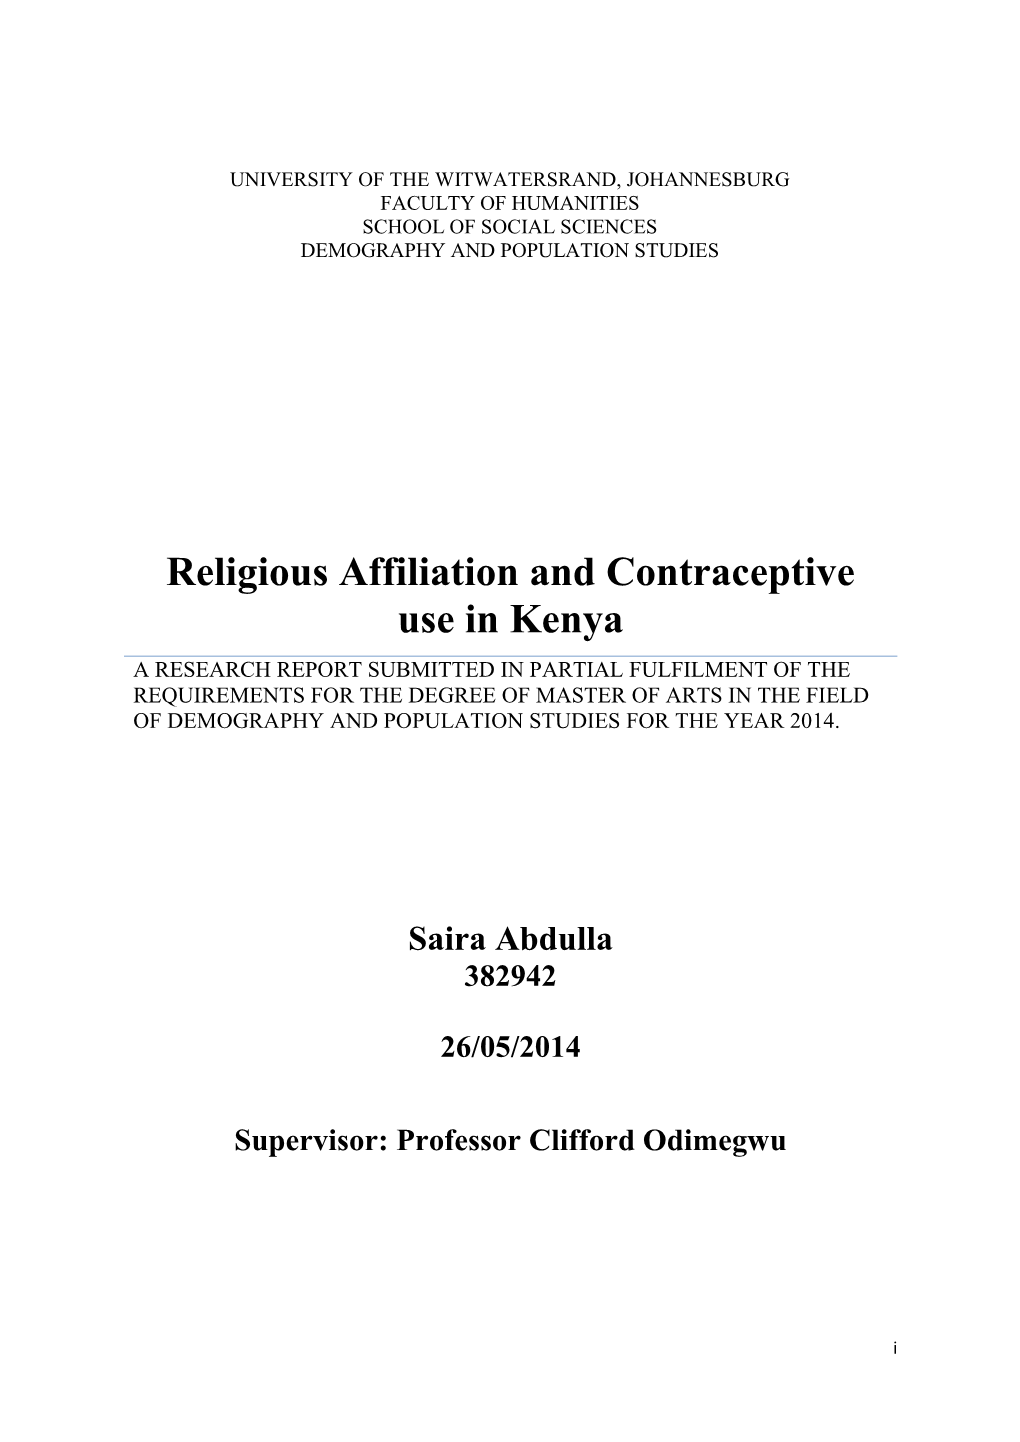 Religious Affiliation and Contraceptive Use in Kenya